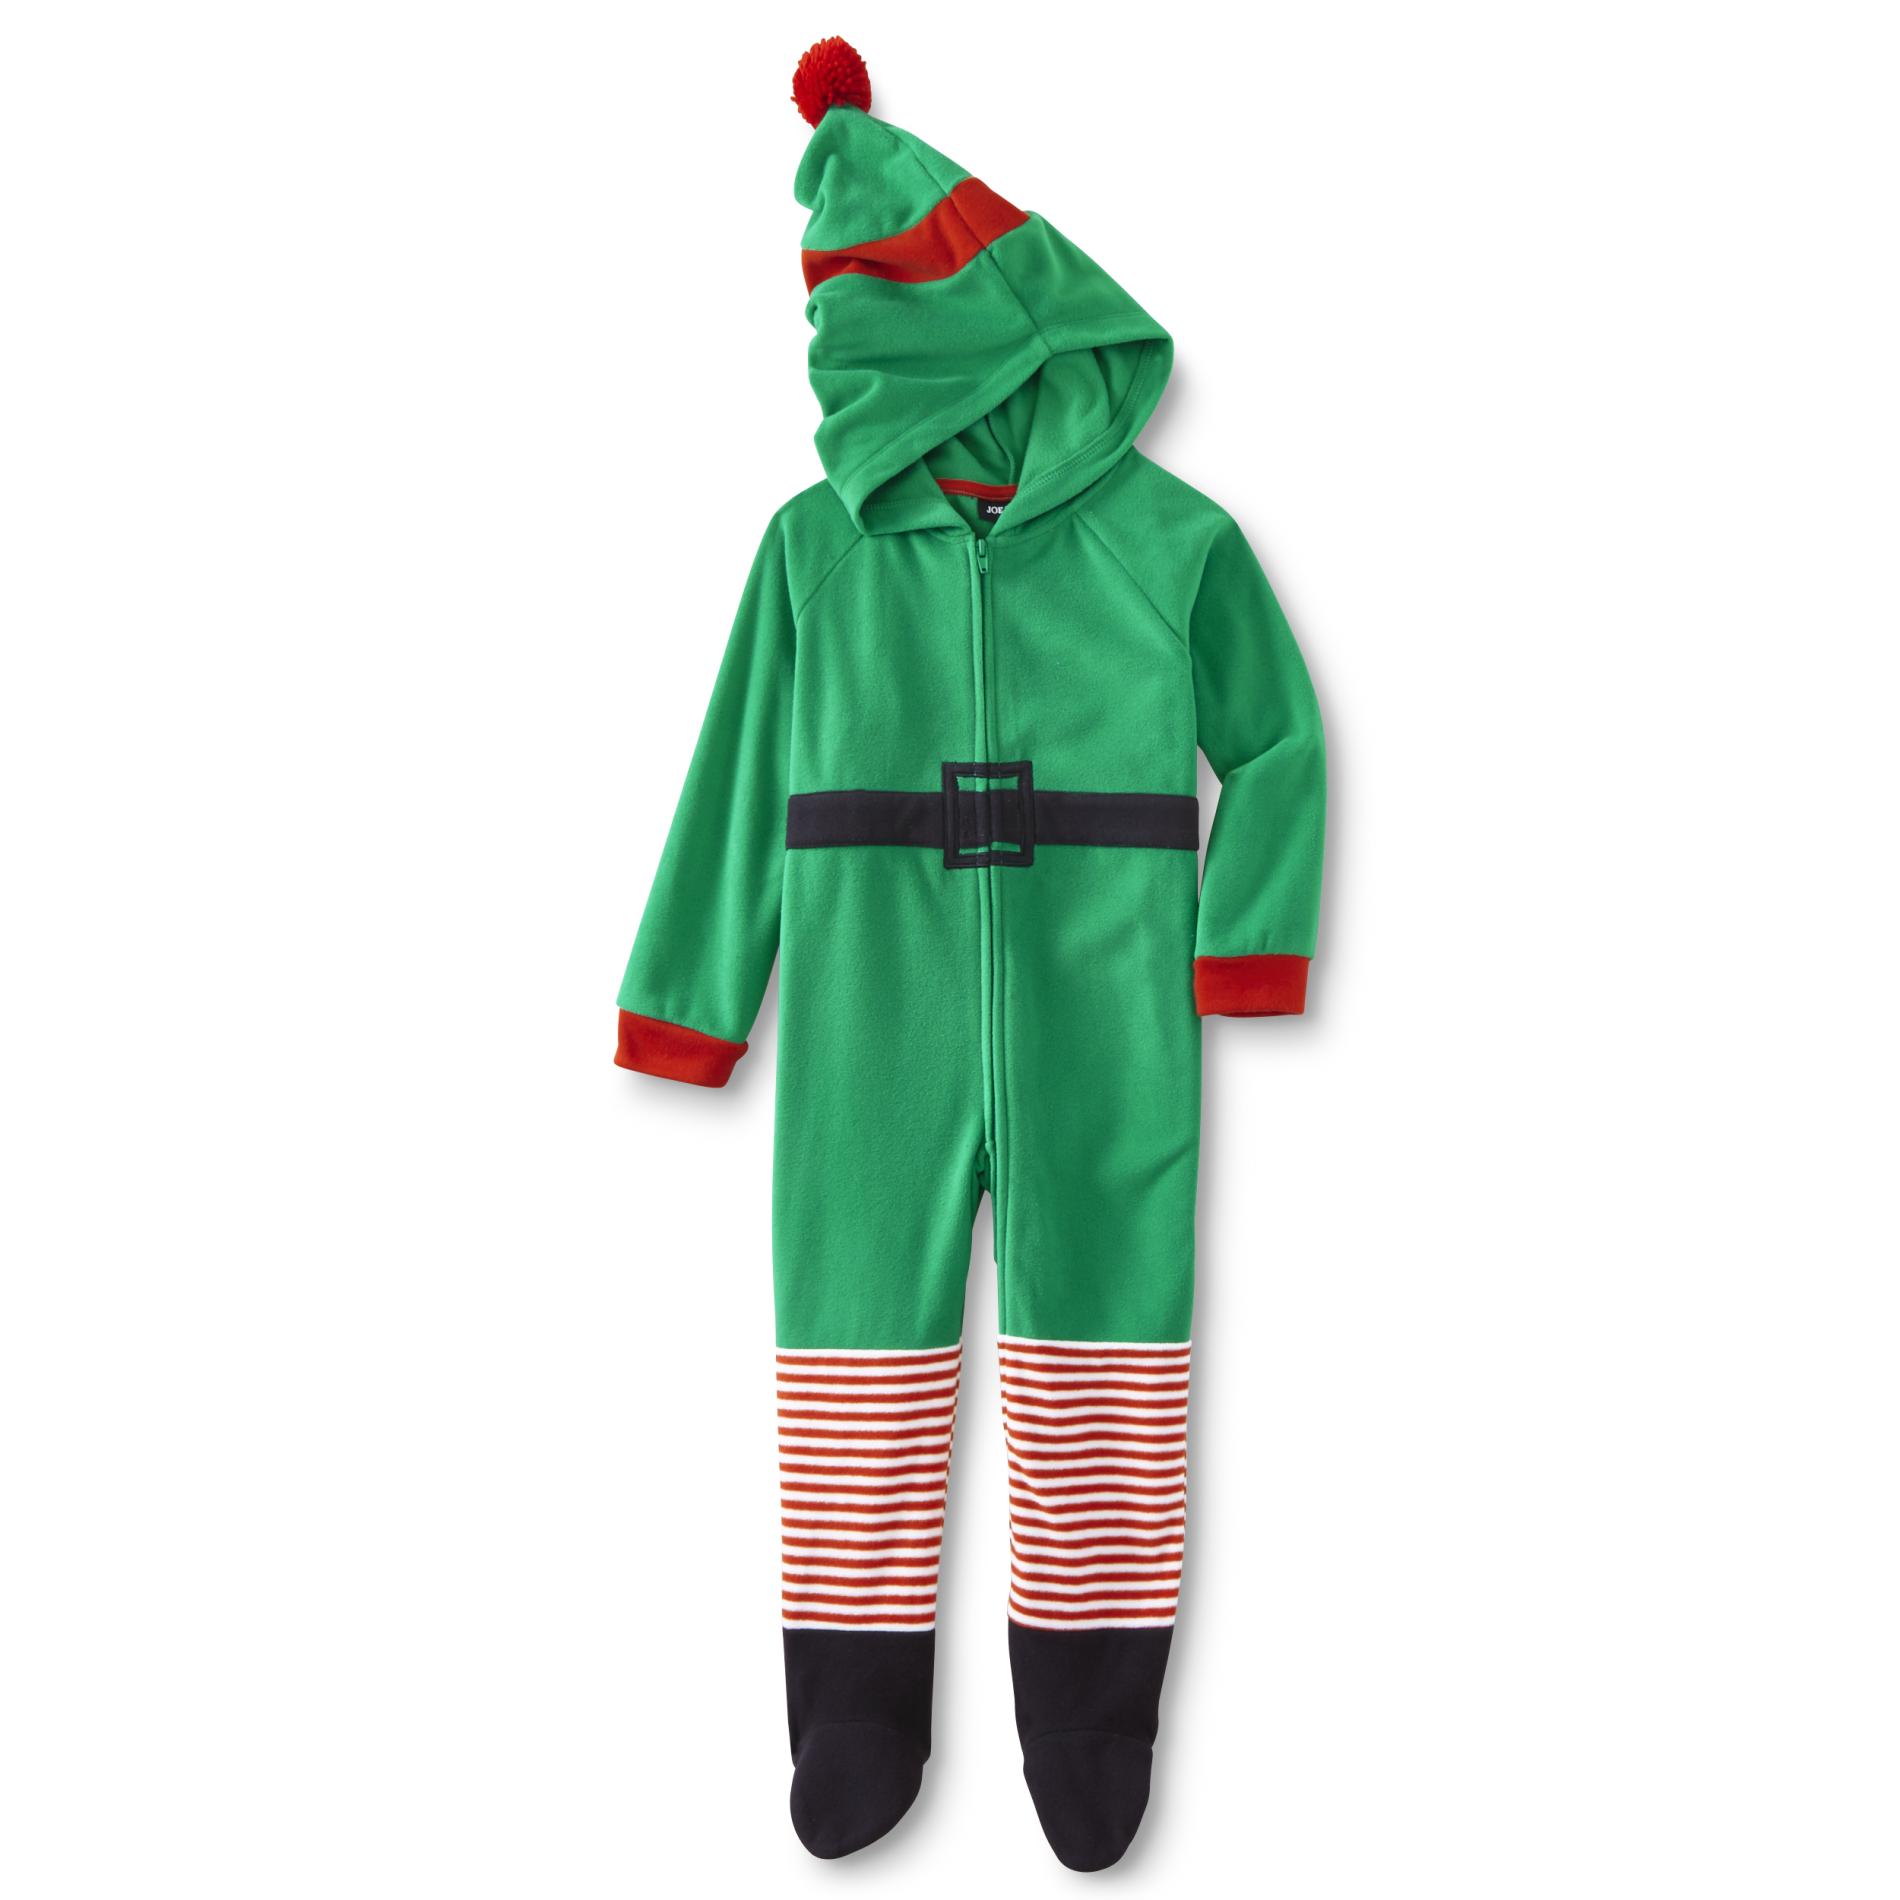 Joe Boxer Sleep for the Family Elf Footed Pajamas Infant & Toddler Girl's